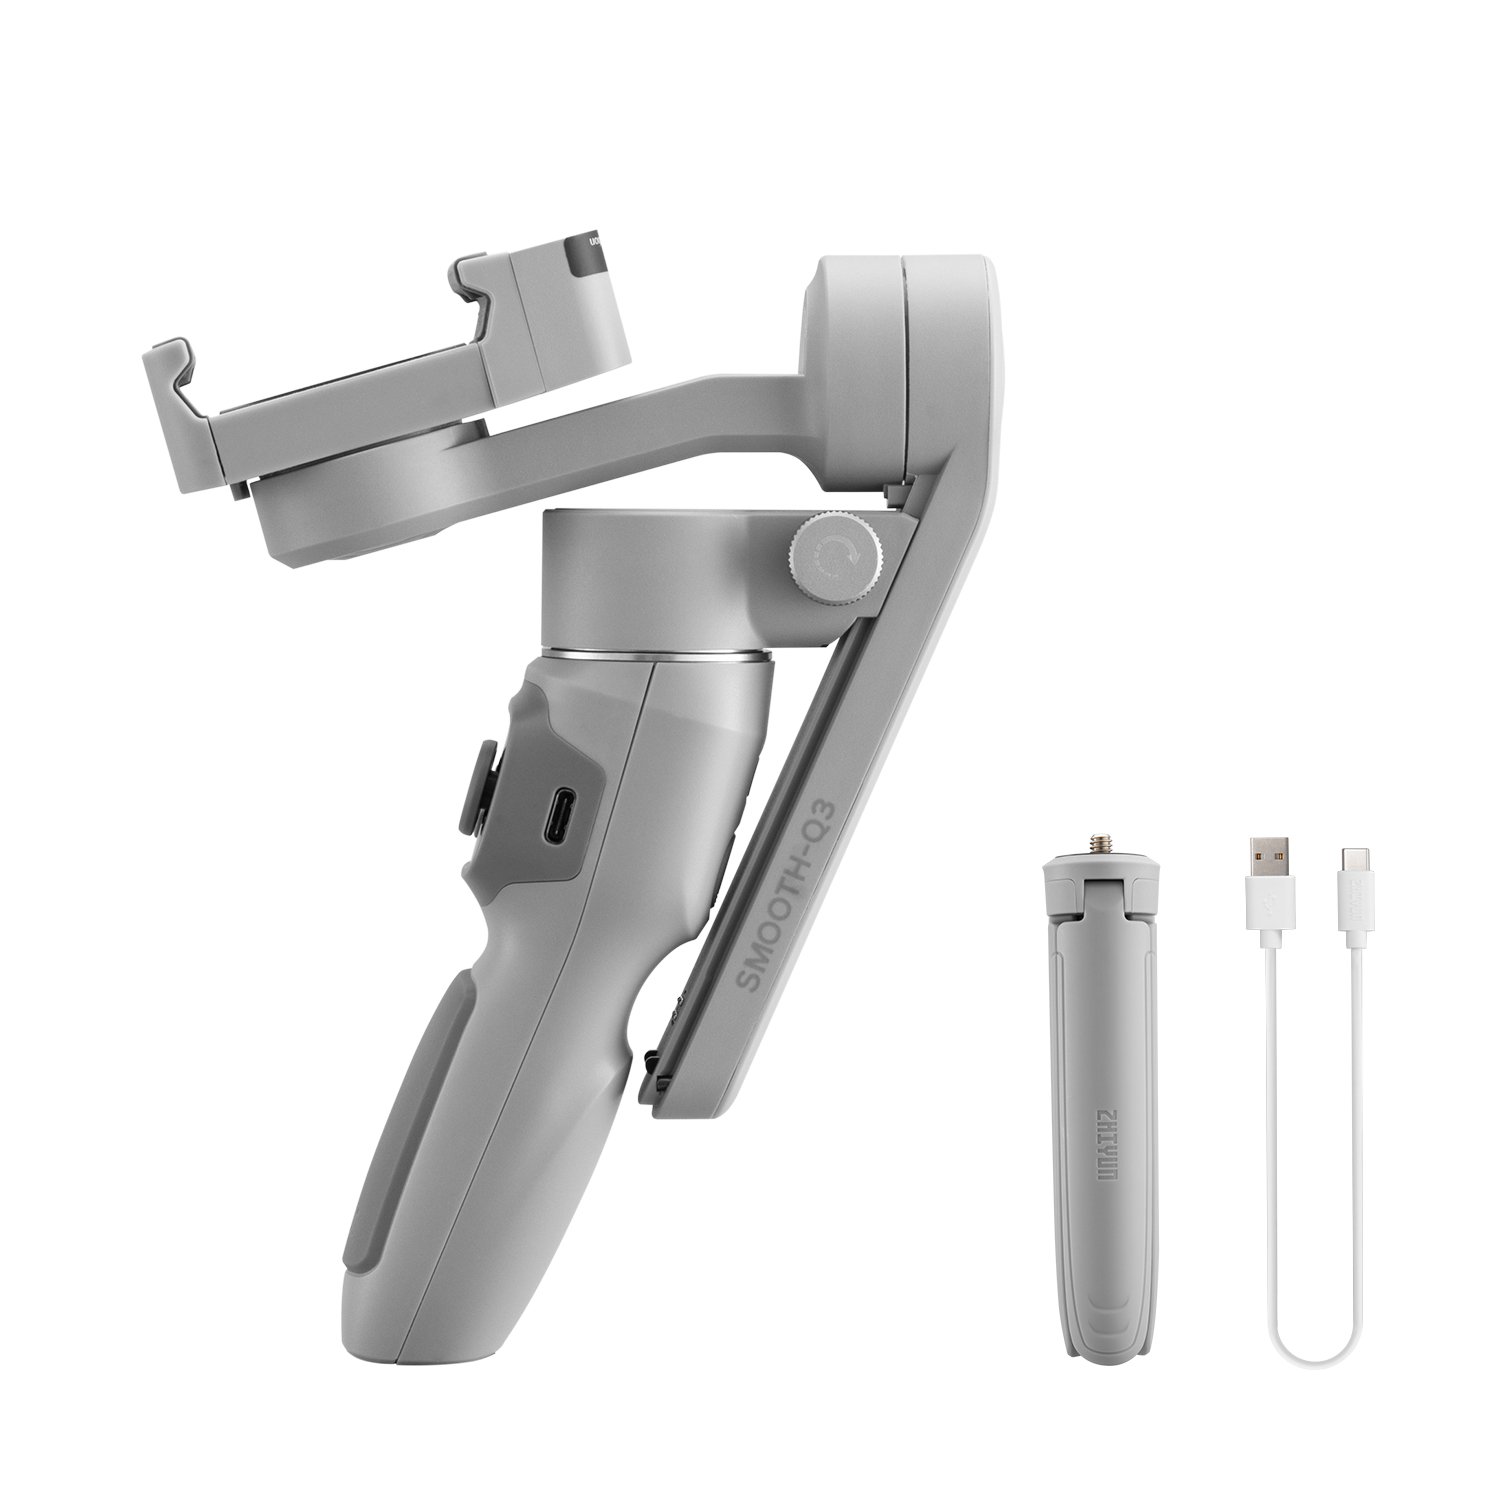 ZHIYUN Official SMOOTH Q3 Gimbal Smartphone 3-Axis Phone Gimbals Stabilizer for iPhone 14 pro max/Xiaomi/Huawei VS DJI OM 6